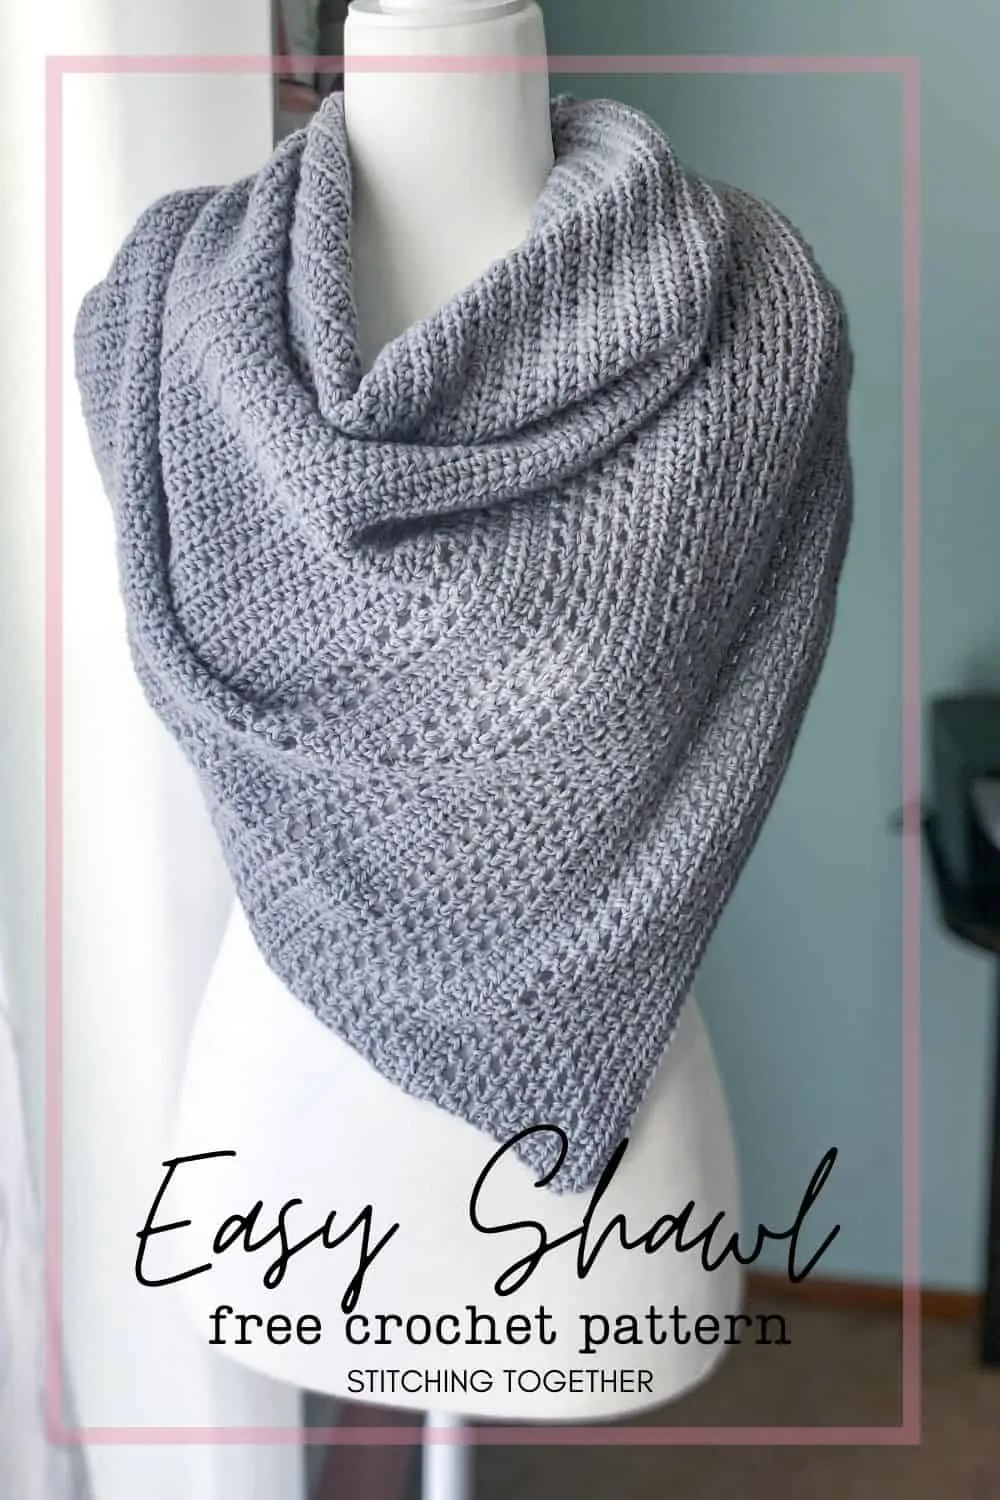 mannequin wearing gray crochet triangle shawl